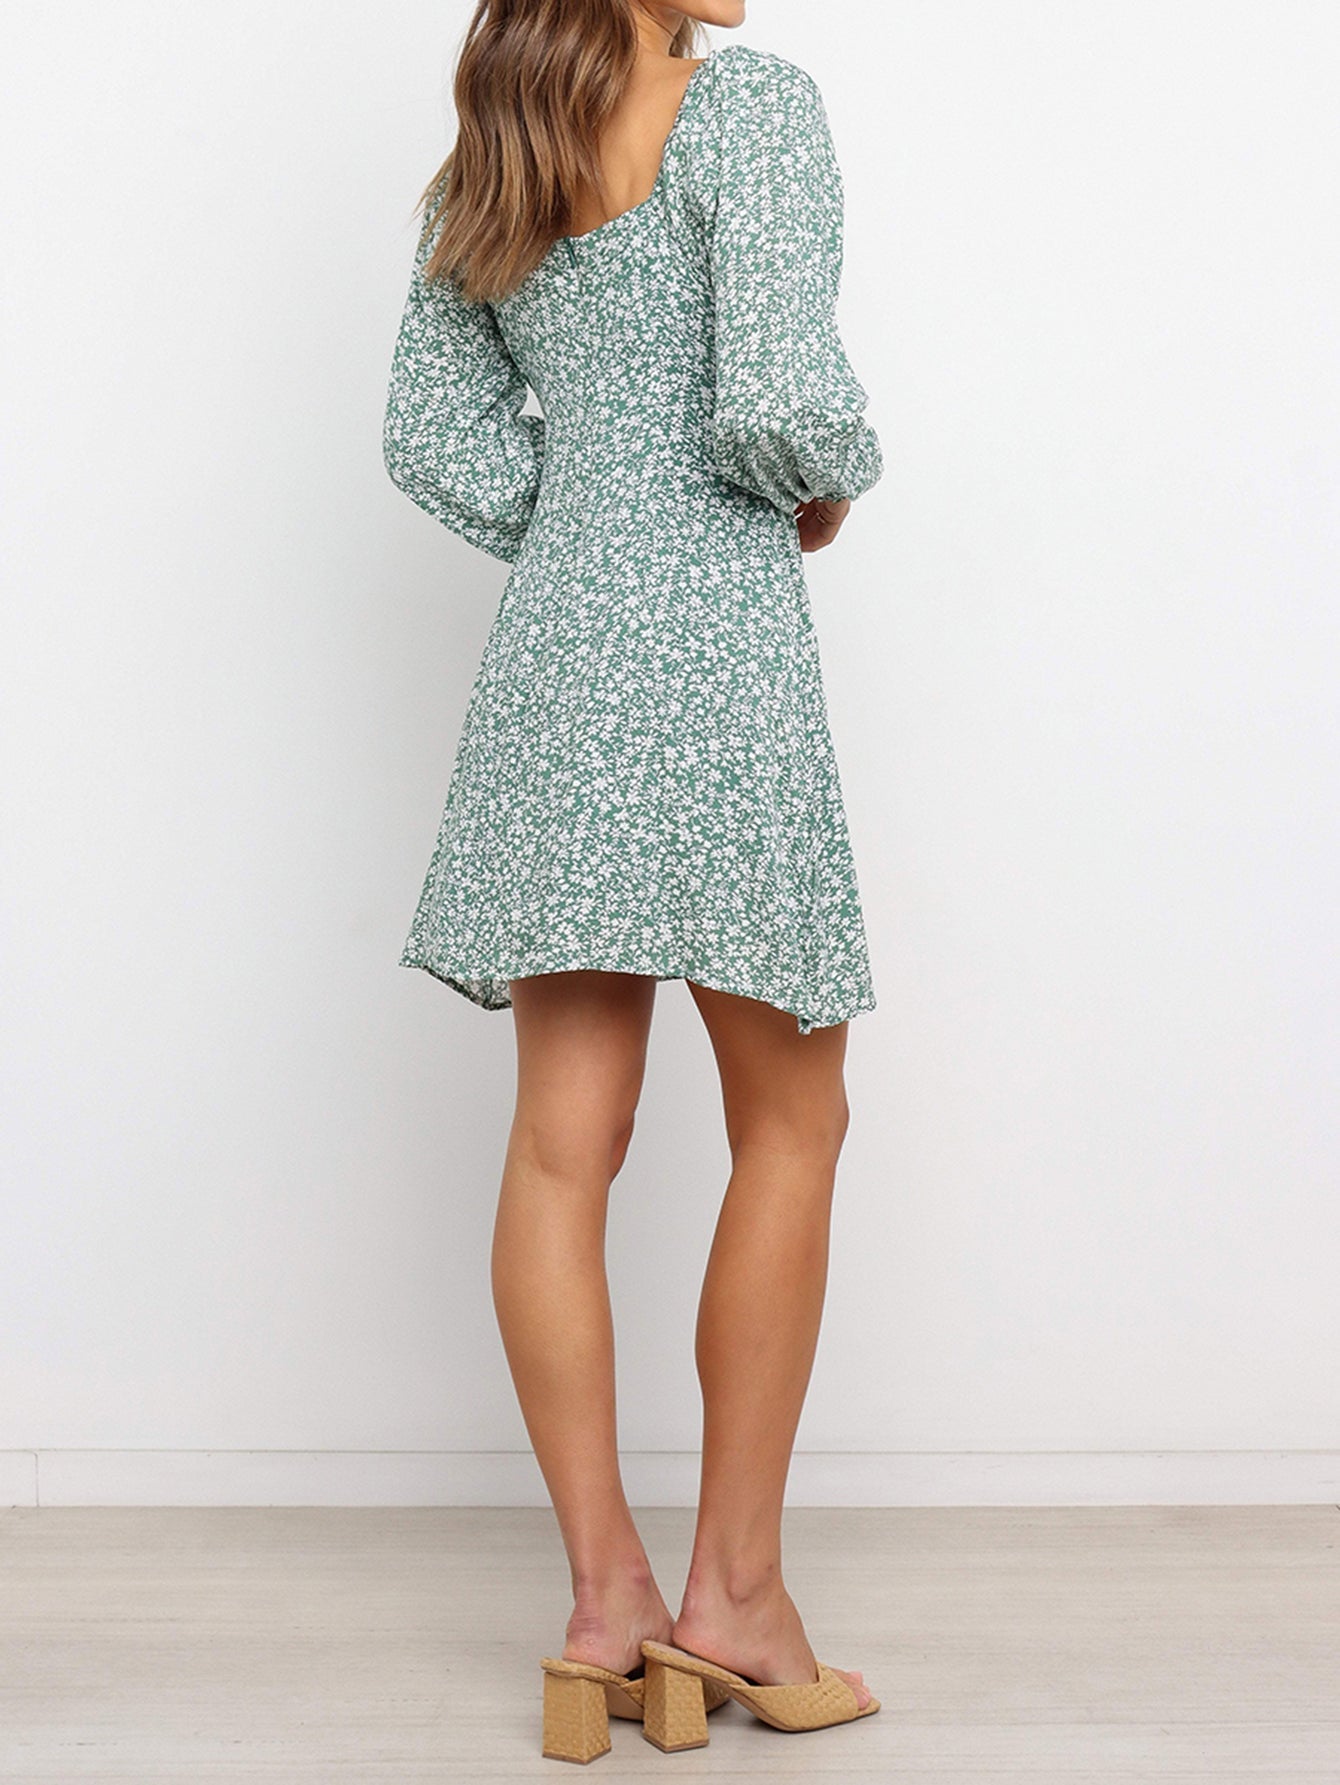 Sexy backless strappy long-sleeve floral dress Sai Feel